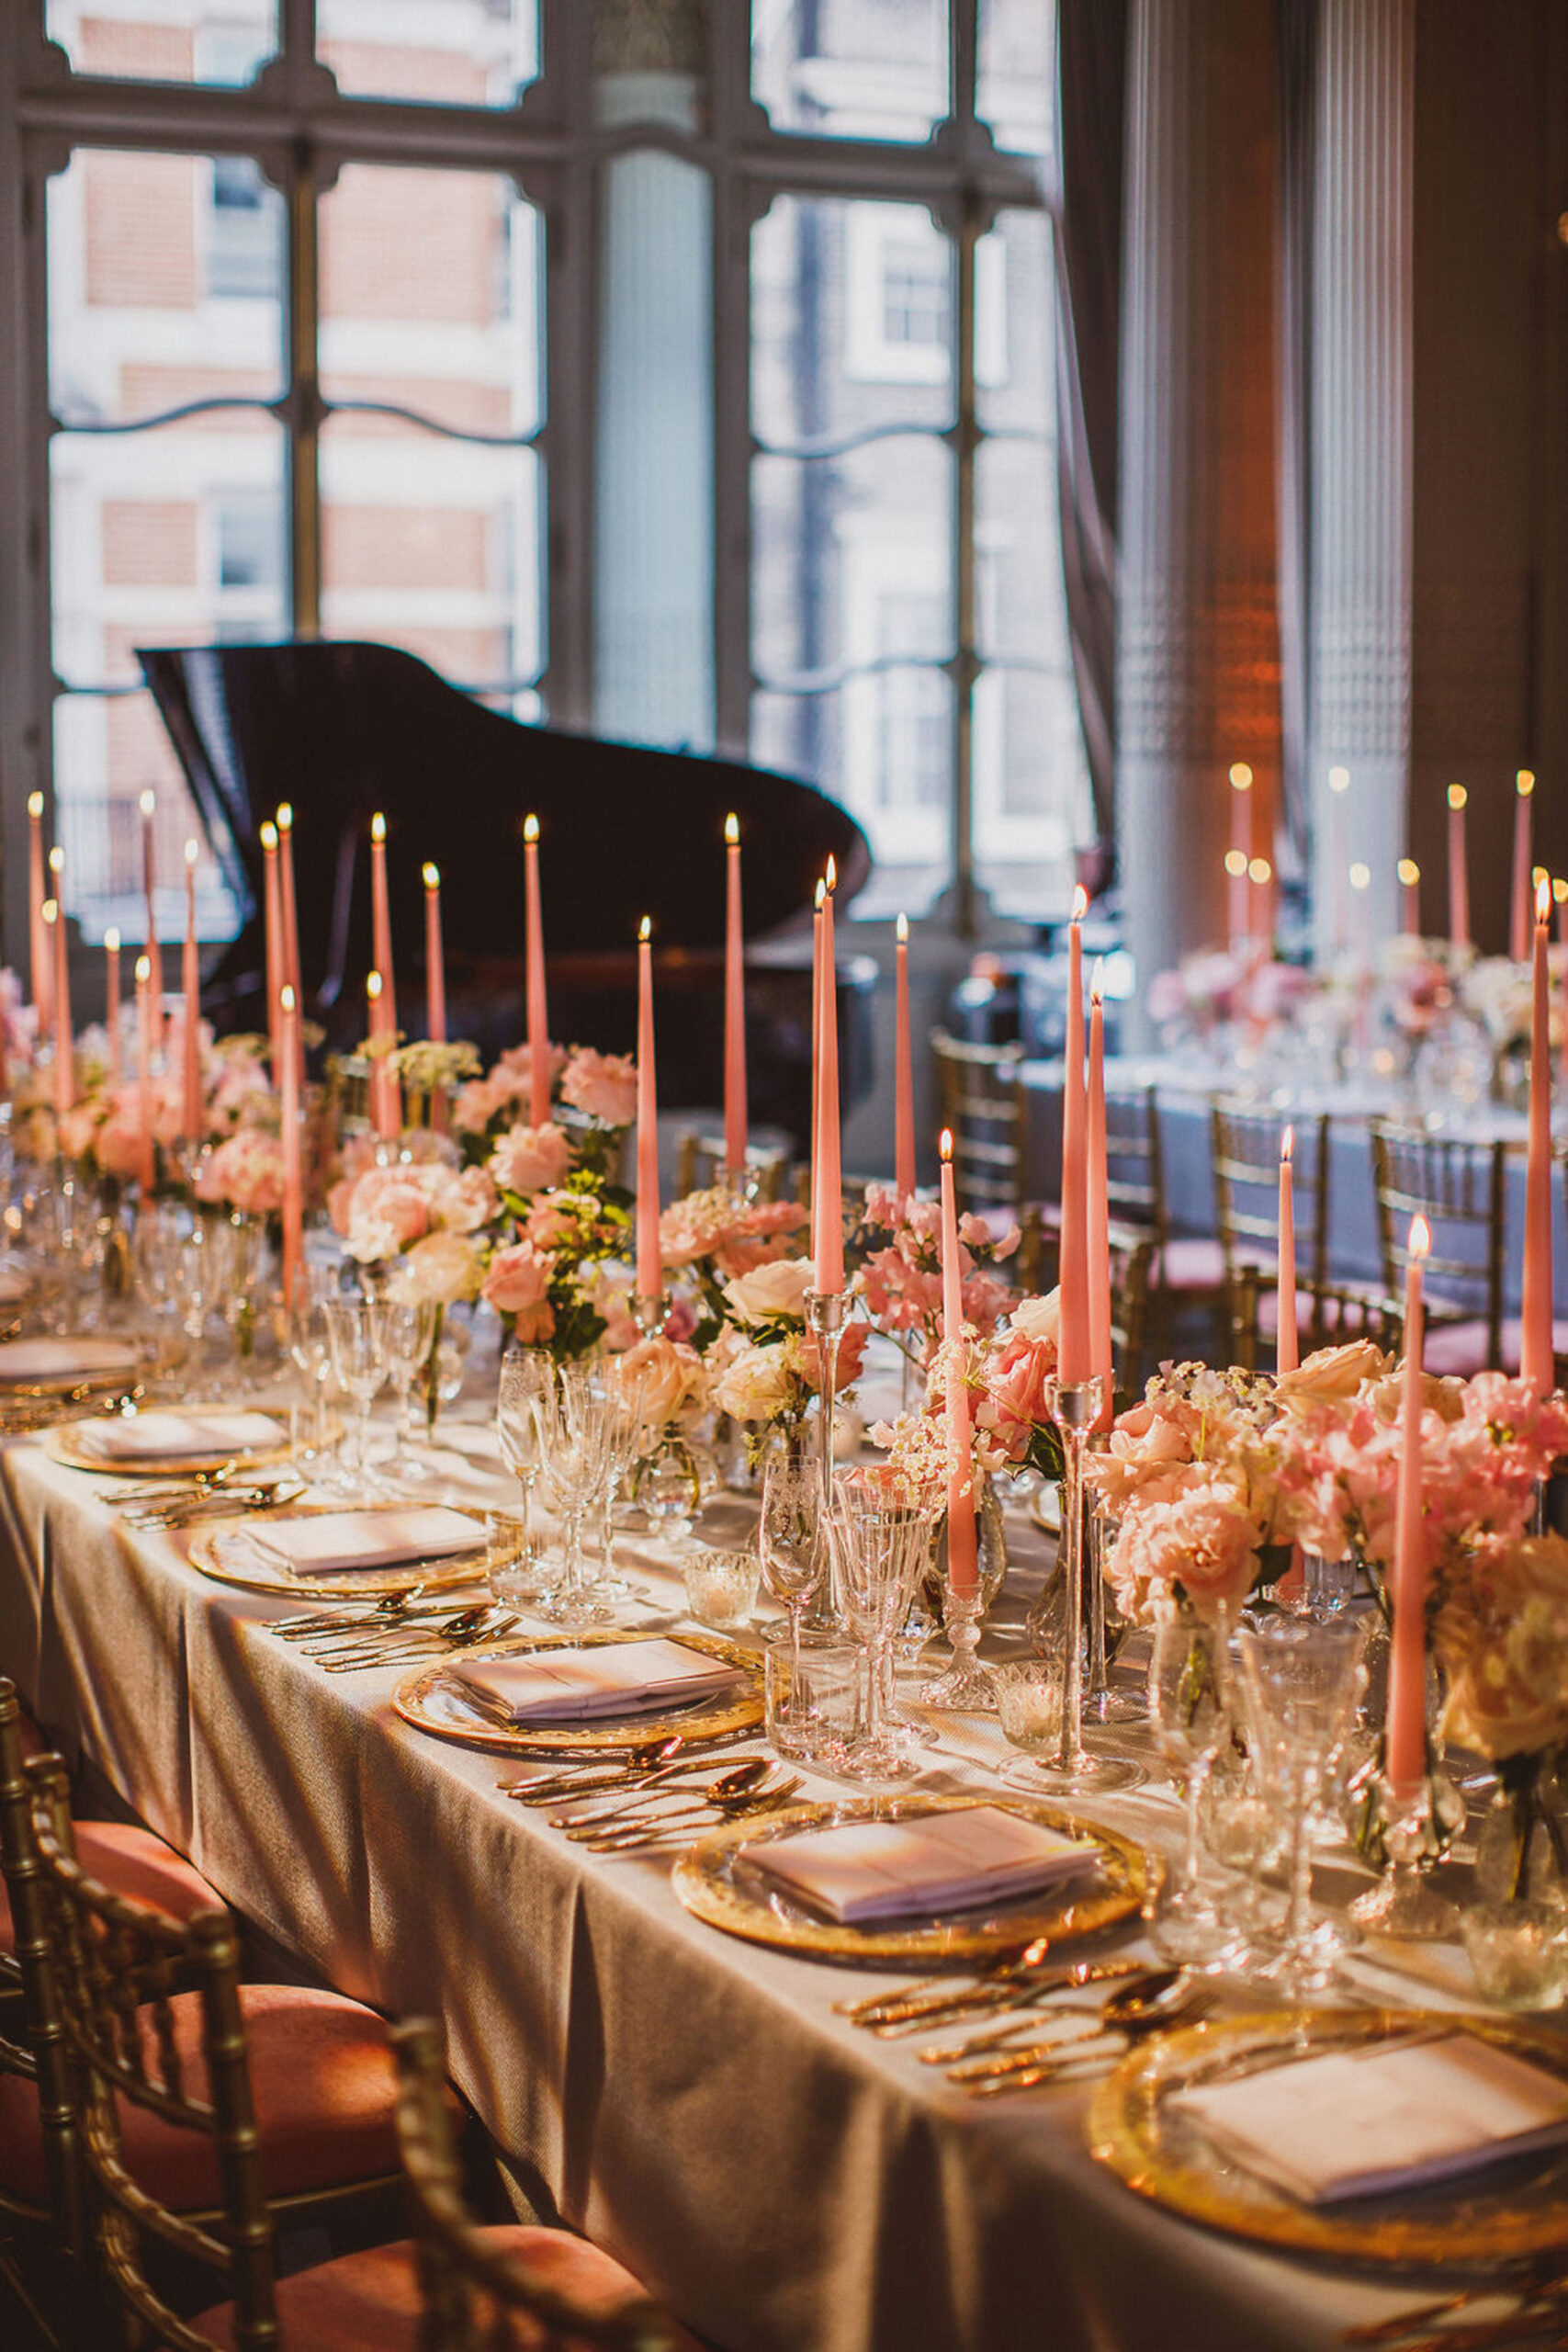 A long banqueting table designed by Mark Niemierko. There are tall pink tapered candles and luxury floral displays running along the tables, and a grand piano in the background